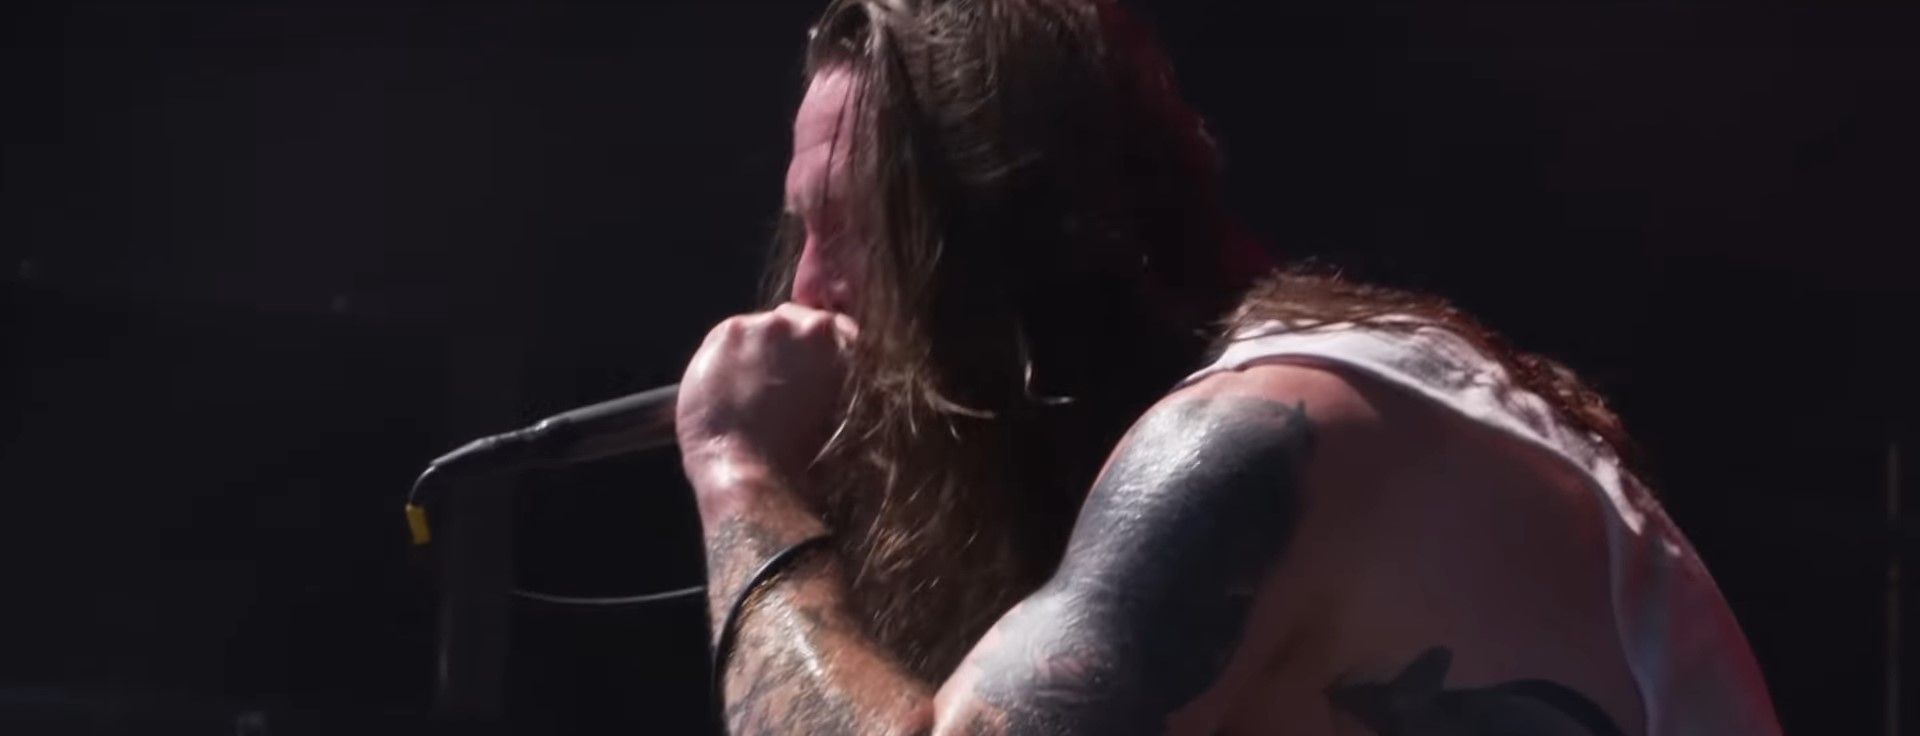 While She Sleeps - The Guilty Party (Live At Vainstream 2019)